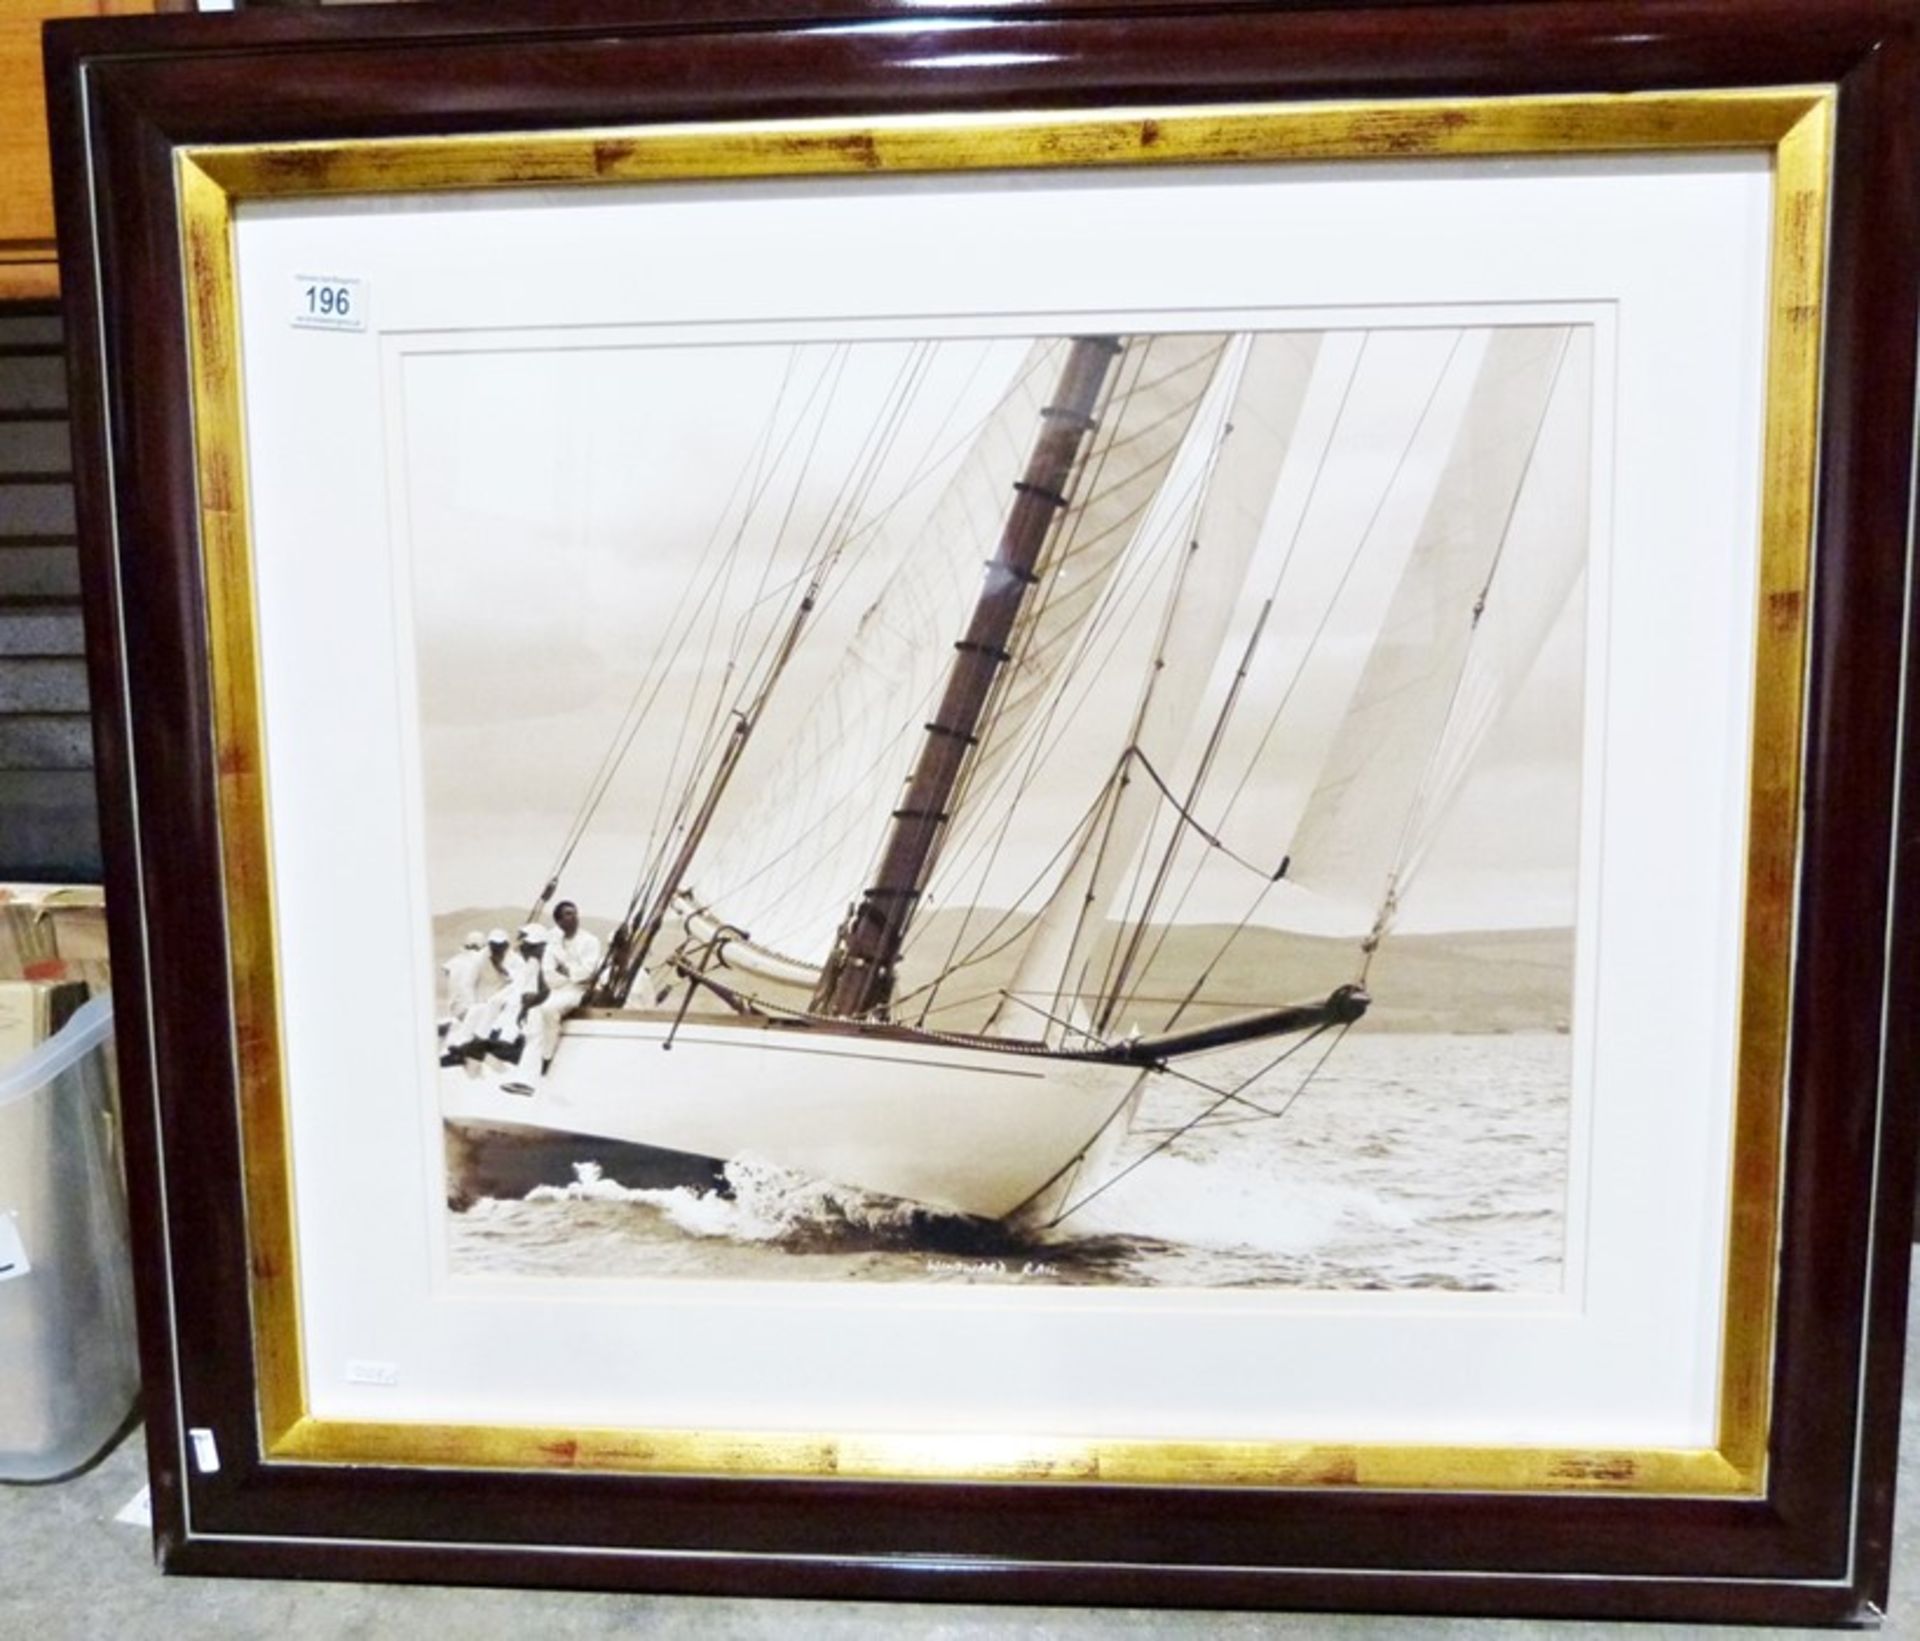 Two framed and glazed photograph prints of yachting scenes, titled "Ready About" and "Windward - Image 2 of 2